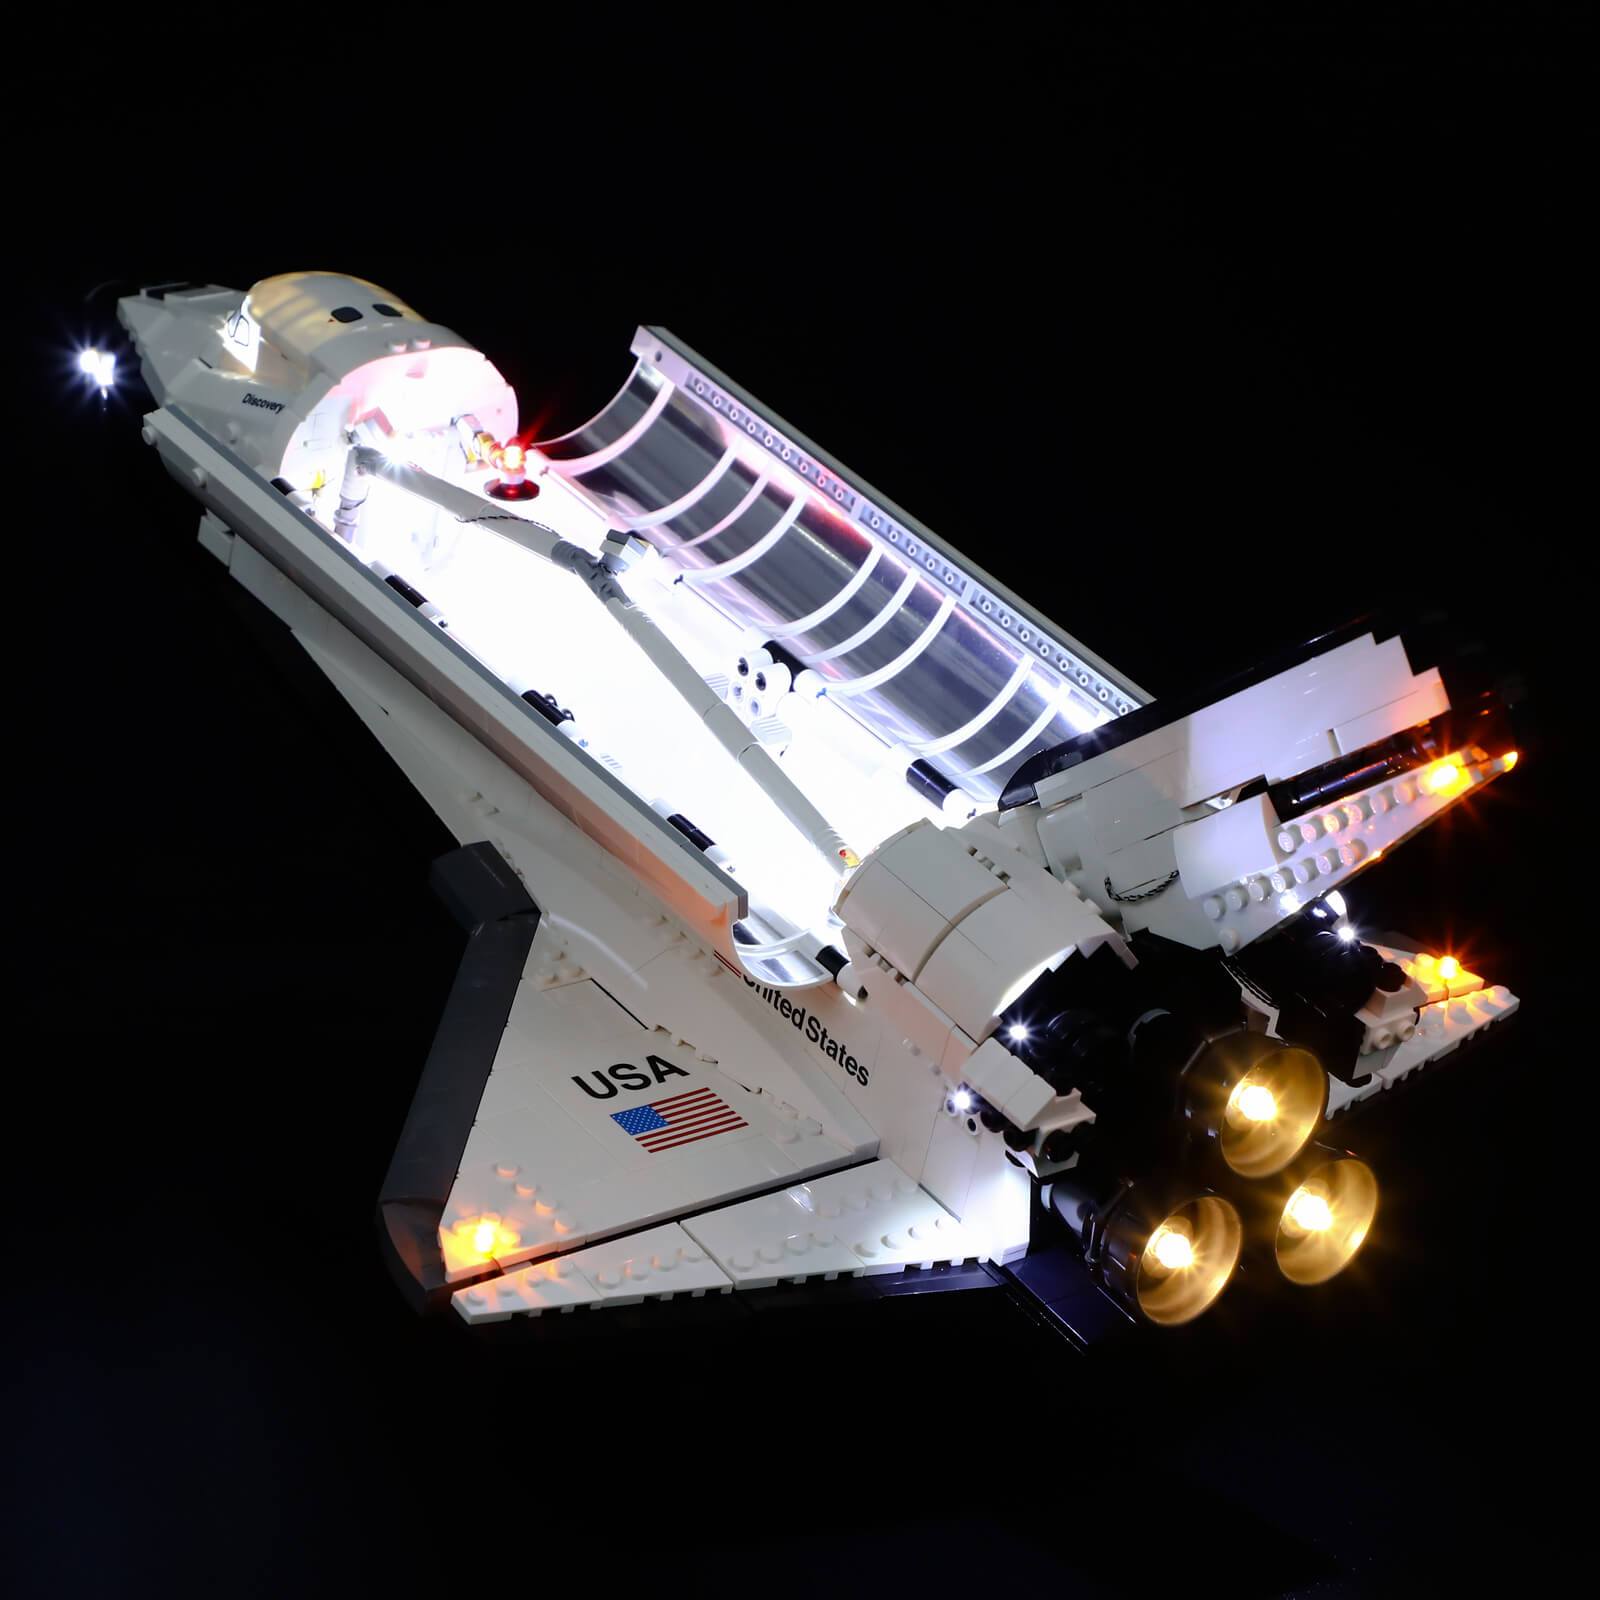 Open the payload bay of the lego discovery shuttle